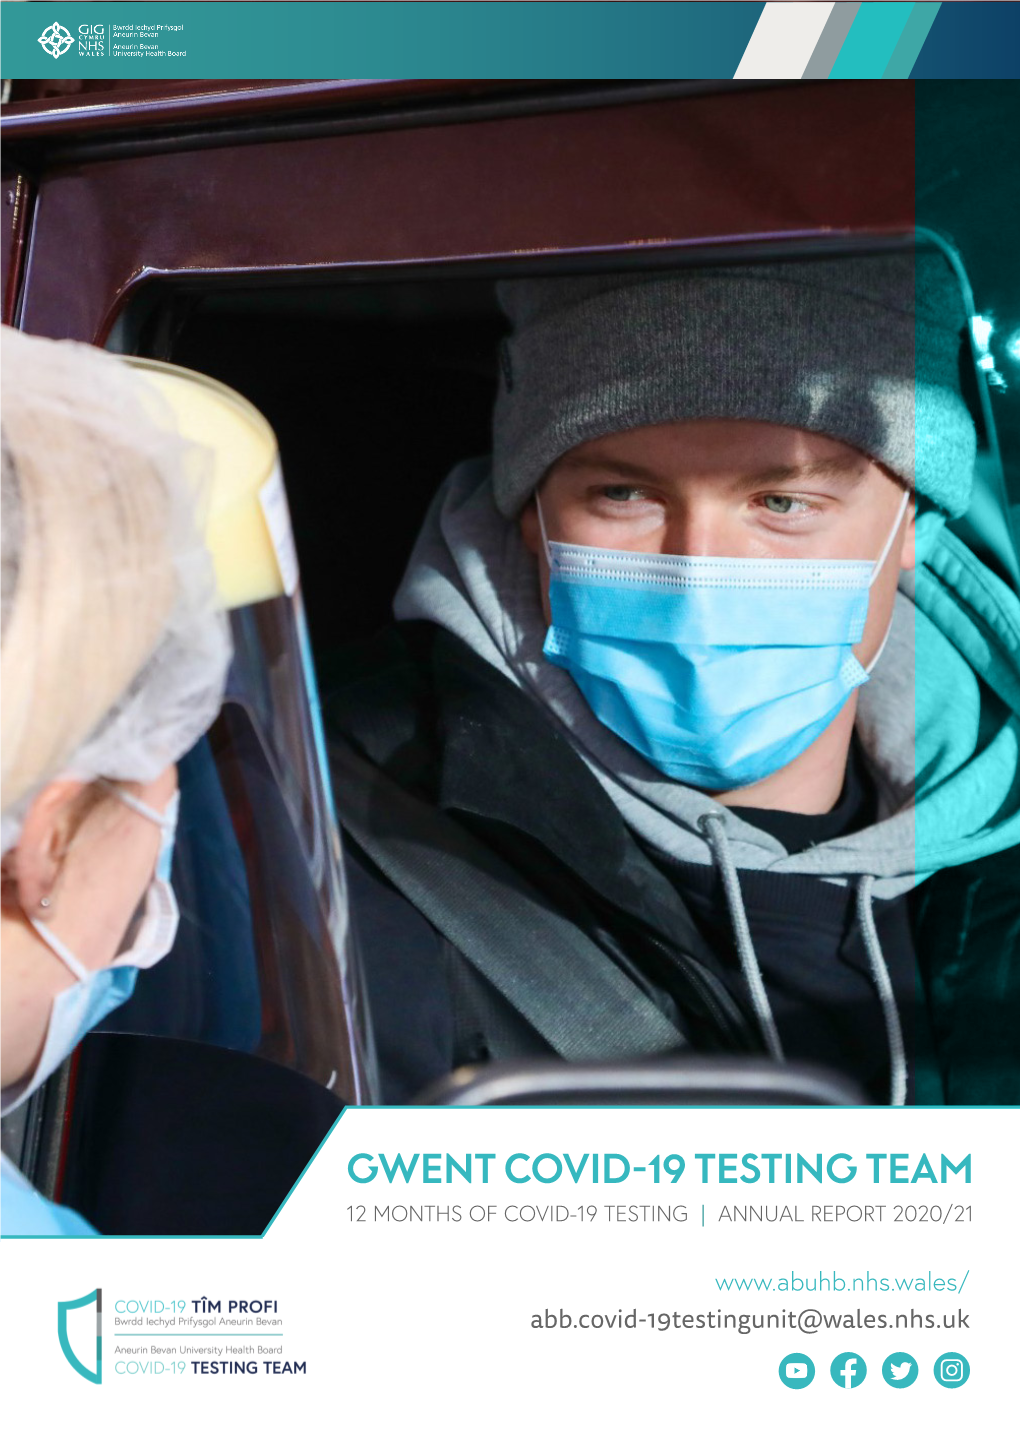 Gwent Covid-19 Testing Team 12 Months of Covid-19 Testing | Annual Report 2020/21